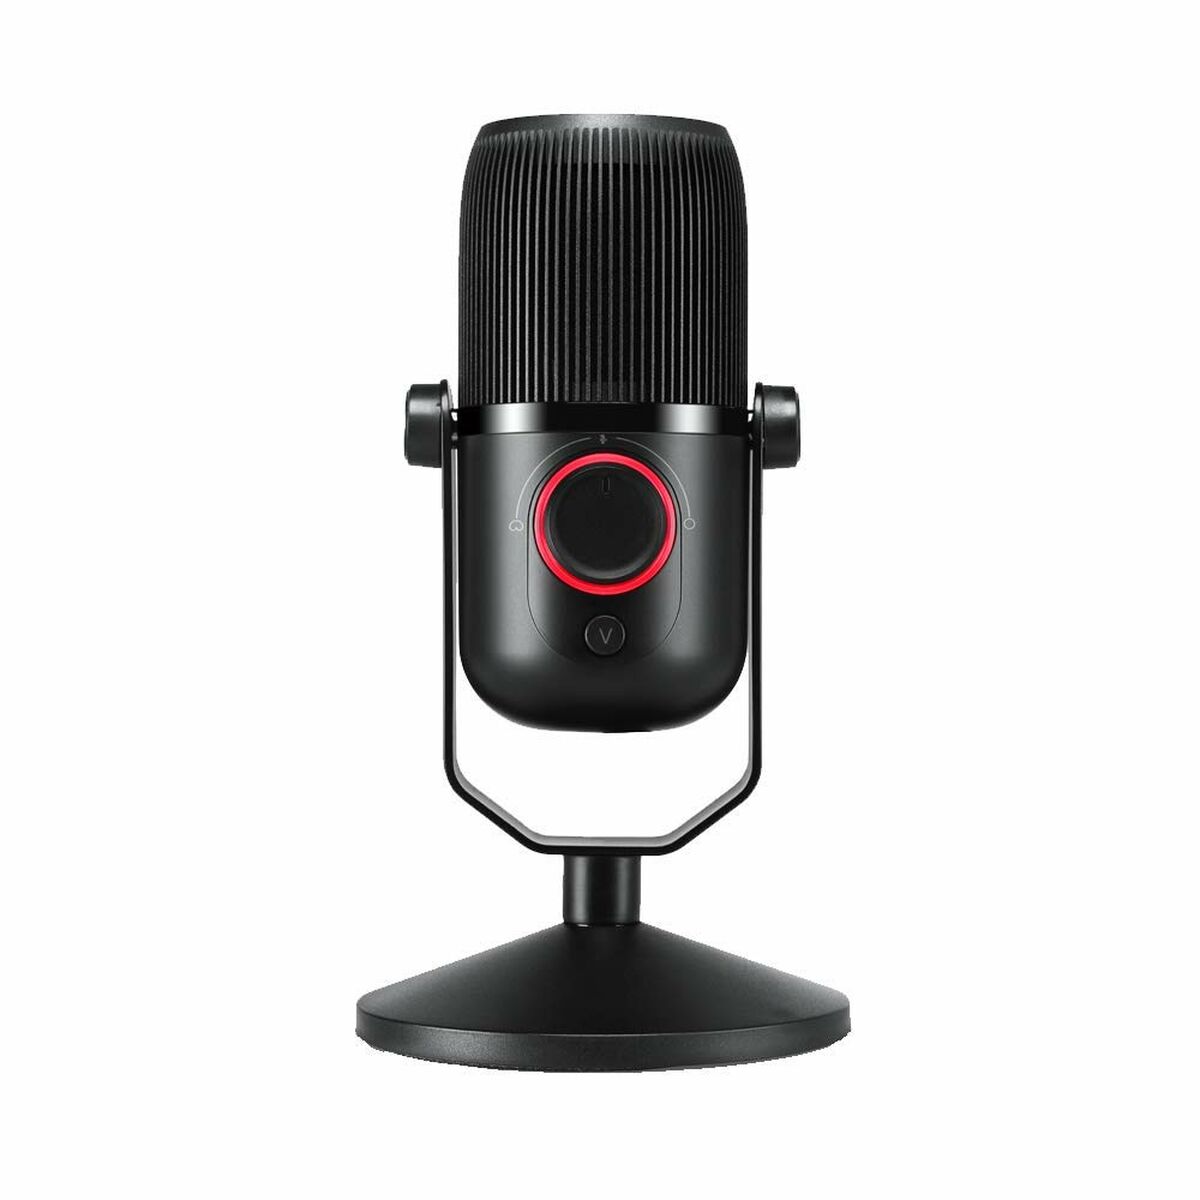 Microphone M4, Thronmax, Computing, Accessories, microphone-m4, :Microphone, Brand_Thronmax, category-reference-2609, category-reference-2642, category-reference-2847, category-reference-t-19685, category-reference-t-19908, category-reference-t-21340, computers / peripherals, Condition_NEW, entertainment, music, office, Price_50 - 100, RiotNook